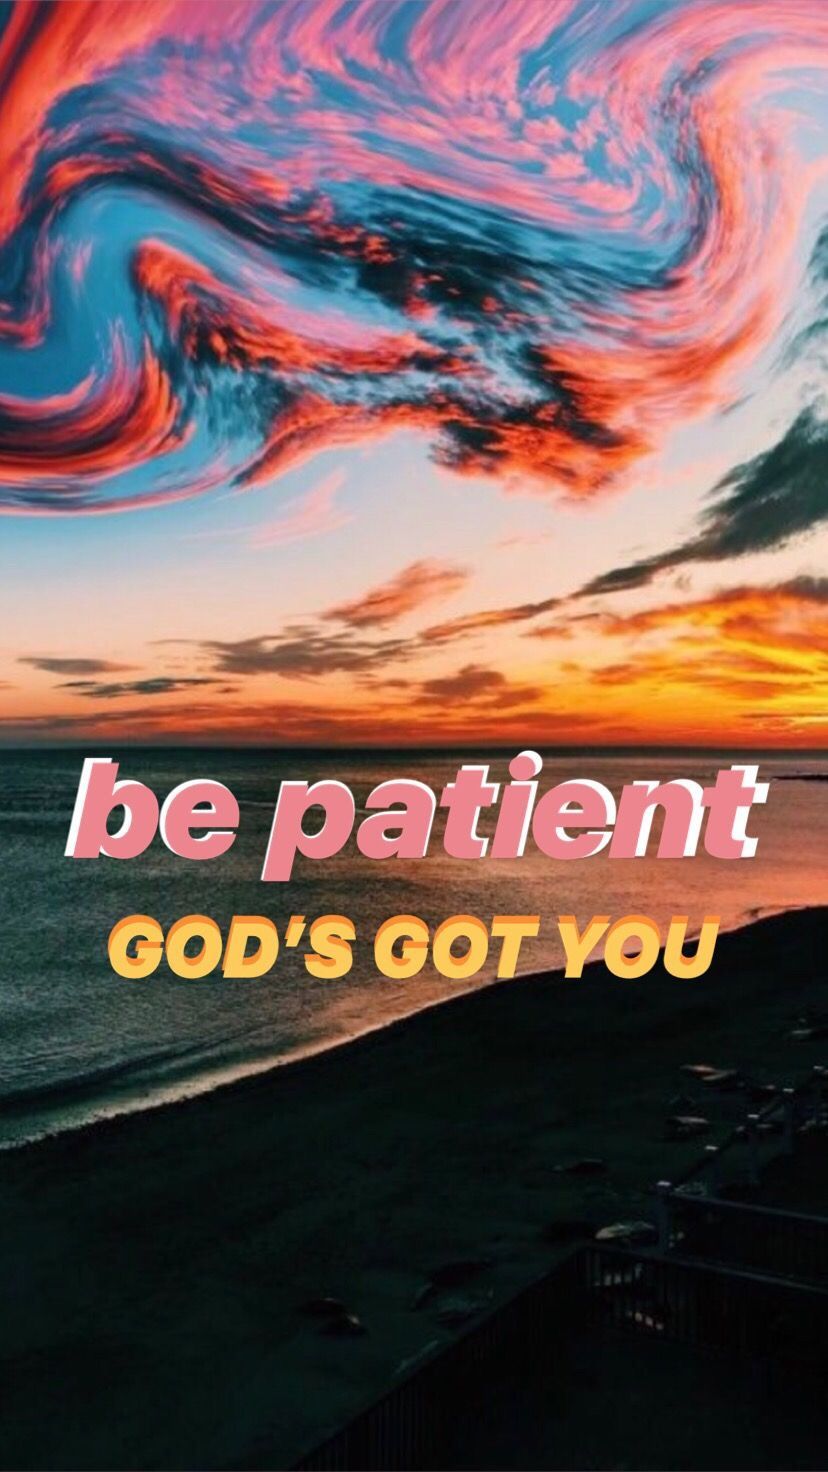 Iphone God Quotes Wallpapers